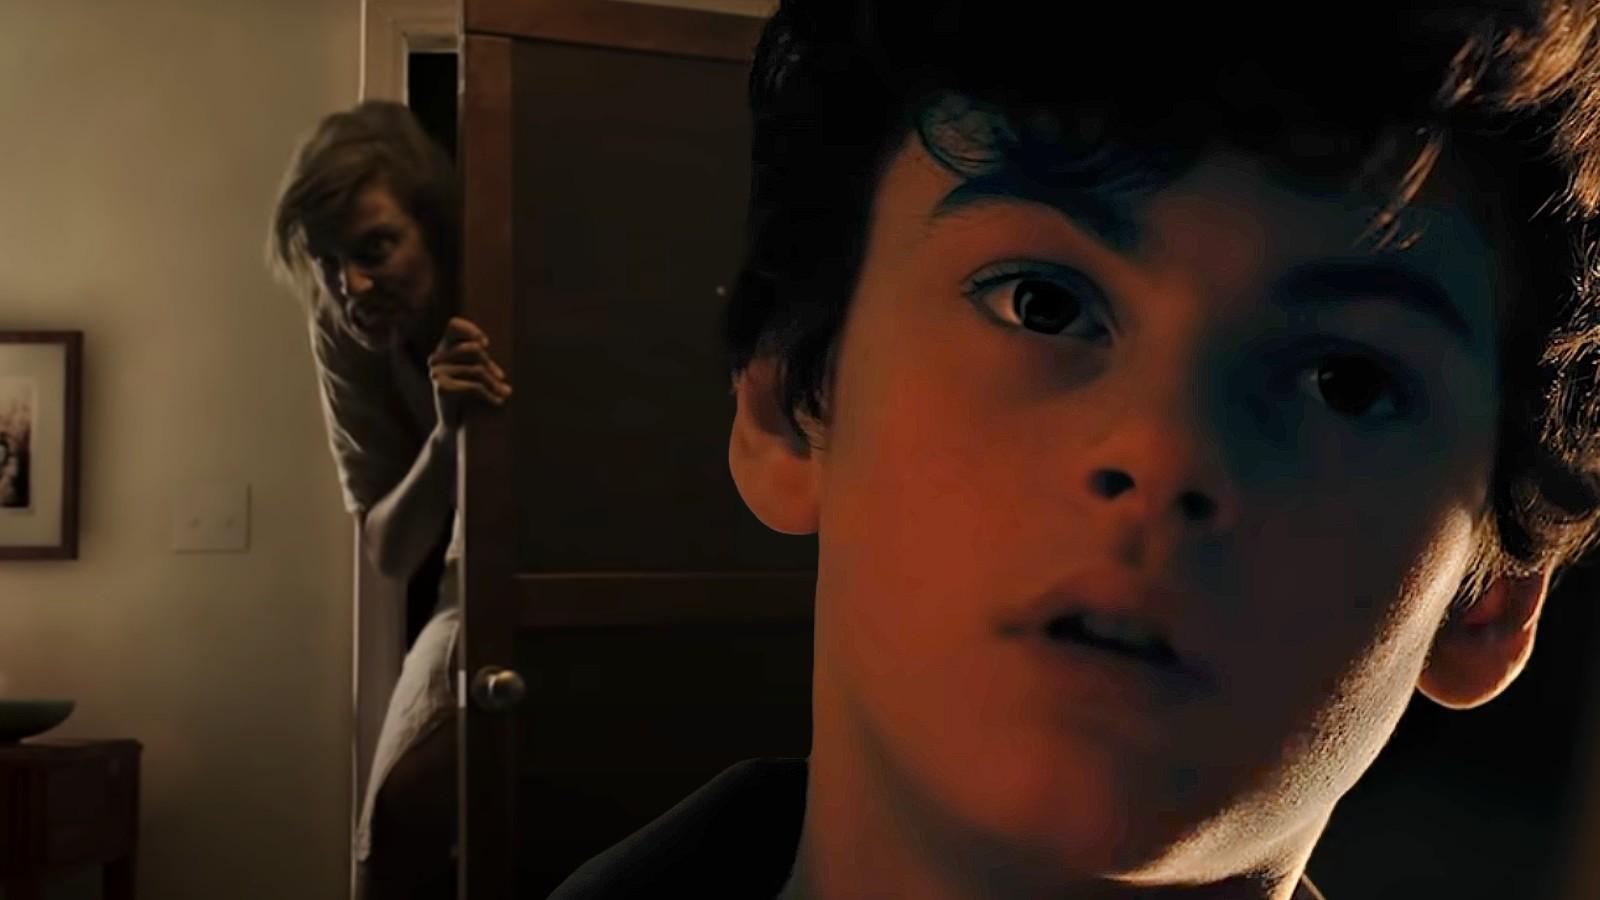 Two stills from the Intruders short film